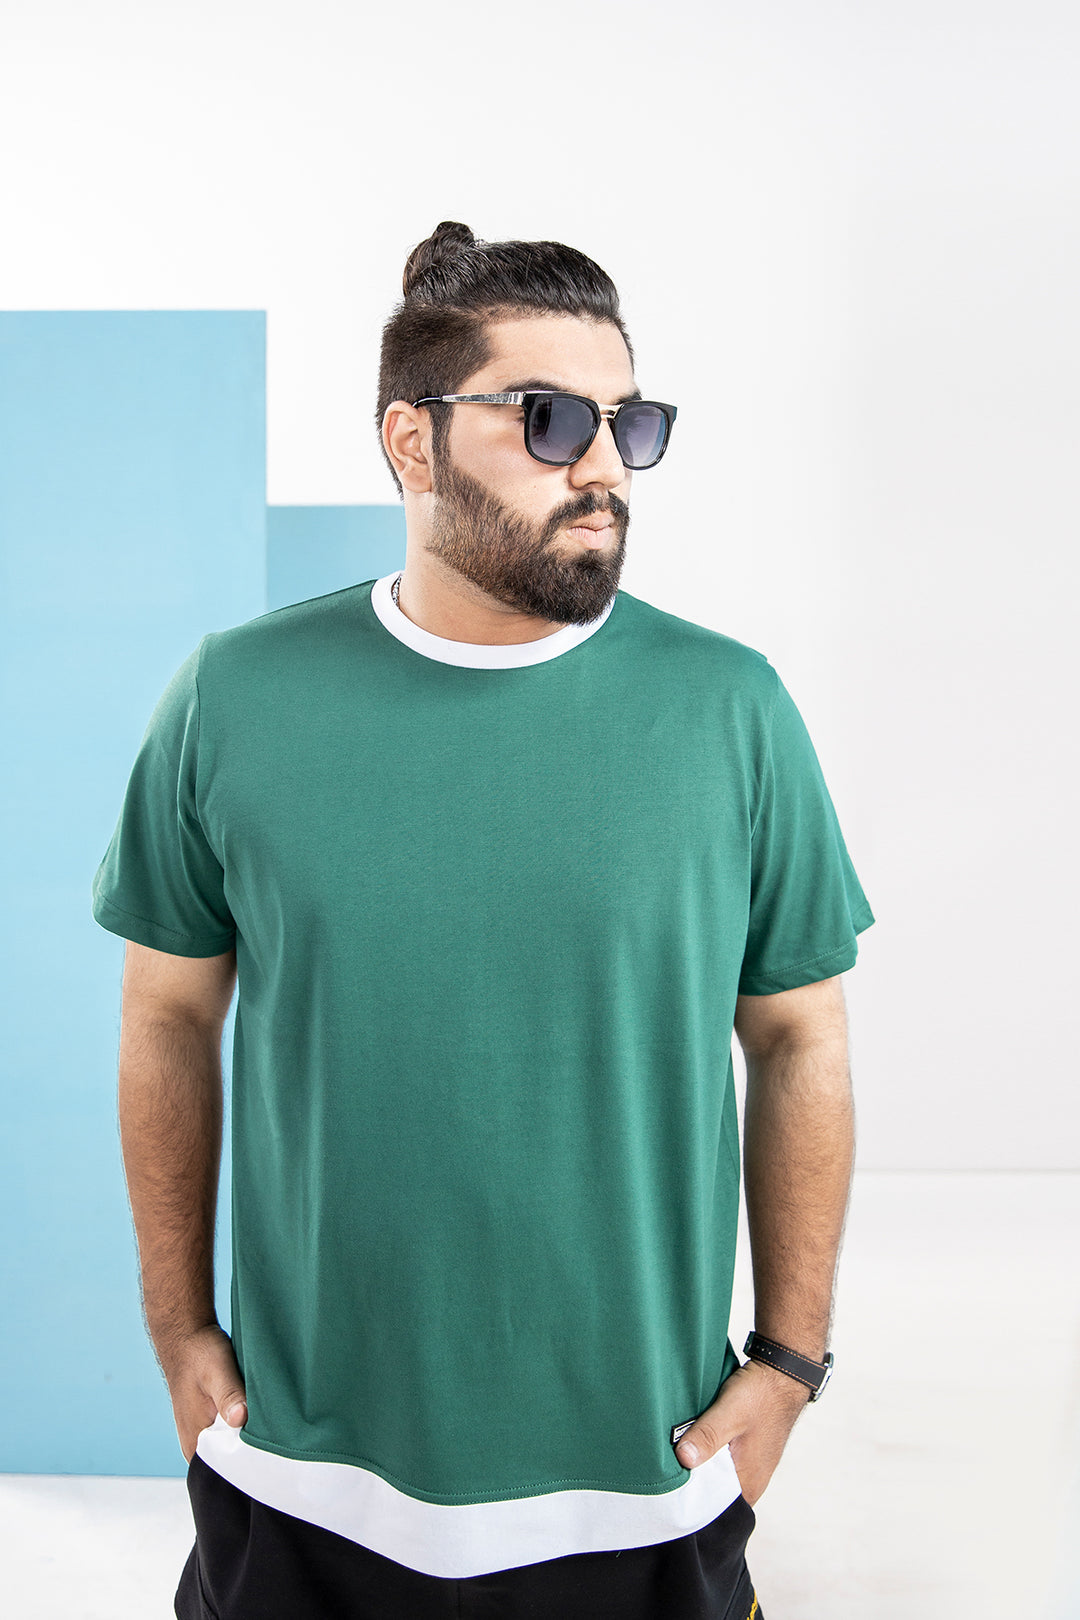 Green Pastures Ribbed T-Shirt (Plus Size) - S21 - MT0064P